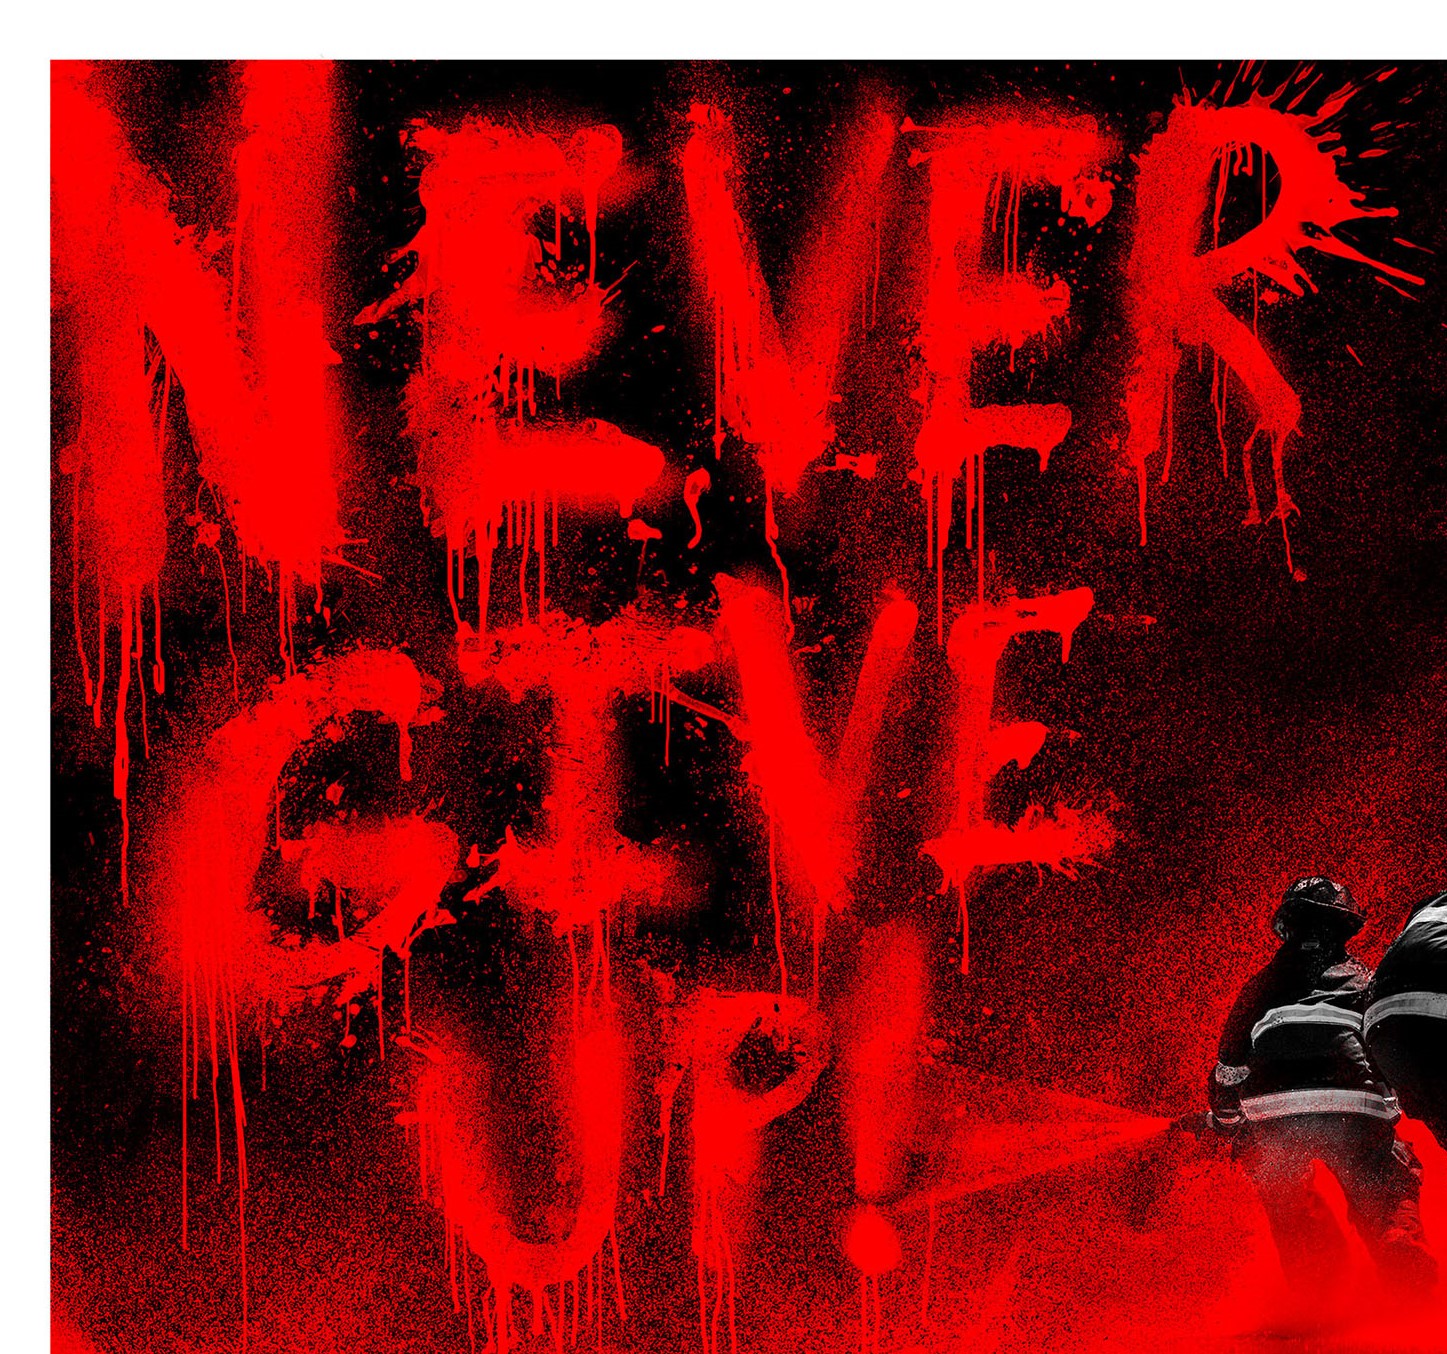 Title: Never Give Up! (2018 Set of 3 (1)RED (1)WHITE AND (1)BLUE)  Artist: Mr. Brainwash  Edition: Limited Edition screenprint on hand torn archival art paper of only 40 copies per color. Signed, numbered and thumb printed on the back.  FULL SET OF 3 - (1)RED (1)WHITE AND (1)BLUE  Type: Screenprint poster on hand torn archival art paper  Size:  22.4" x 26.4"  Notes:  Released in honor of the Los Angeles Firefighters in regards to the recent Woosley fires that have devastated Southern California.